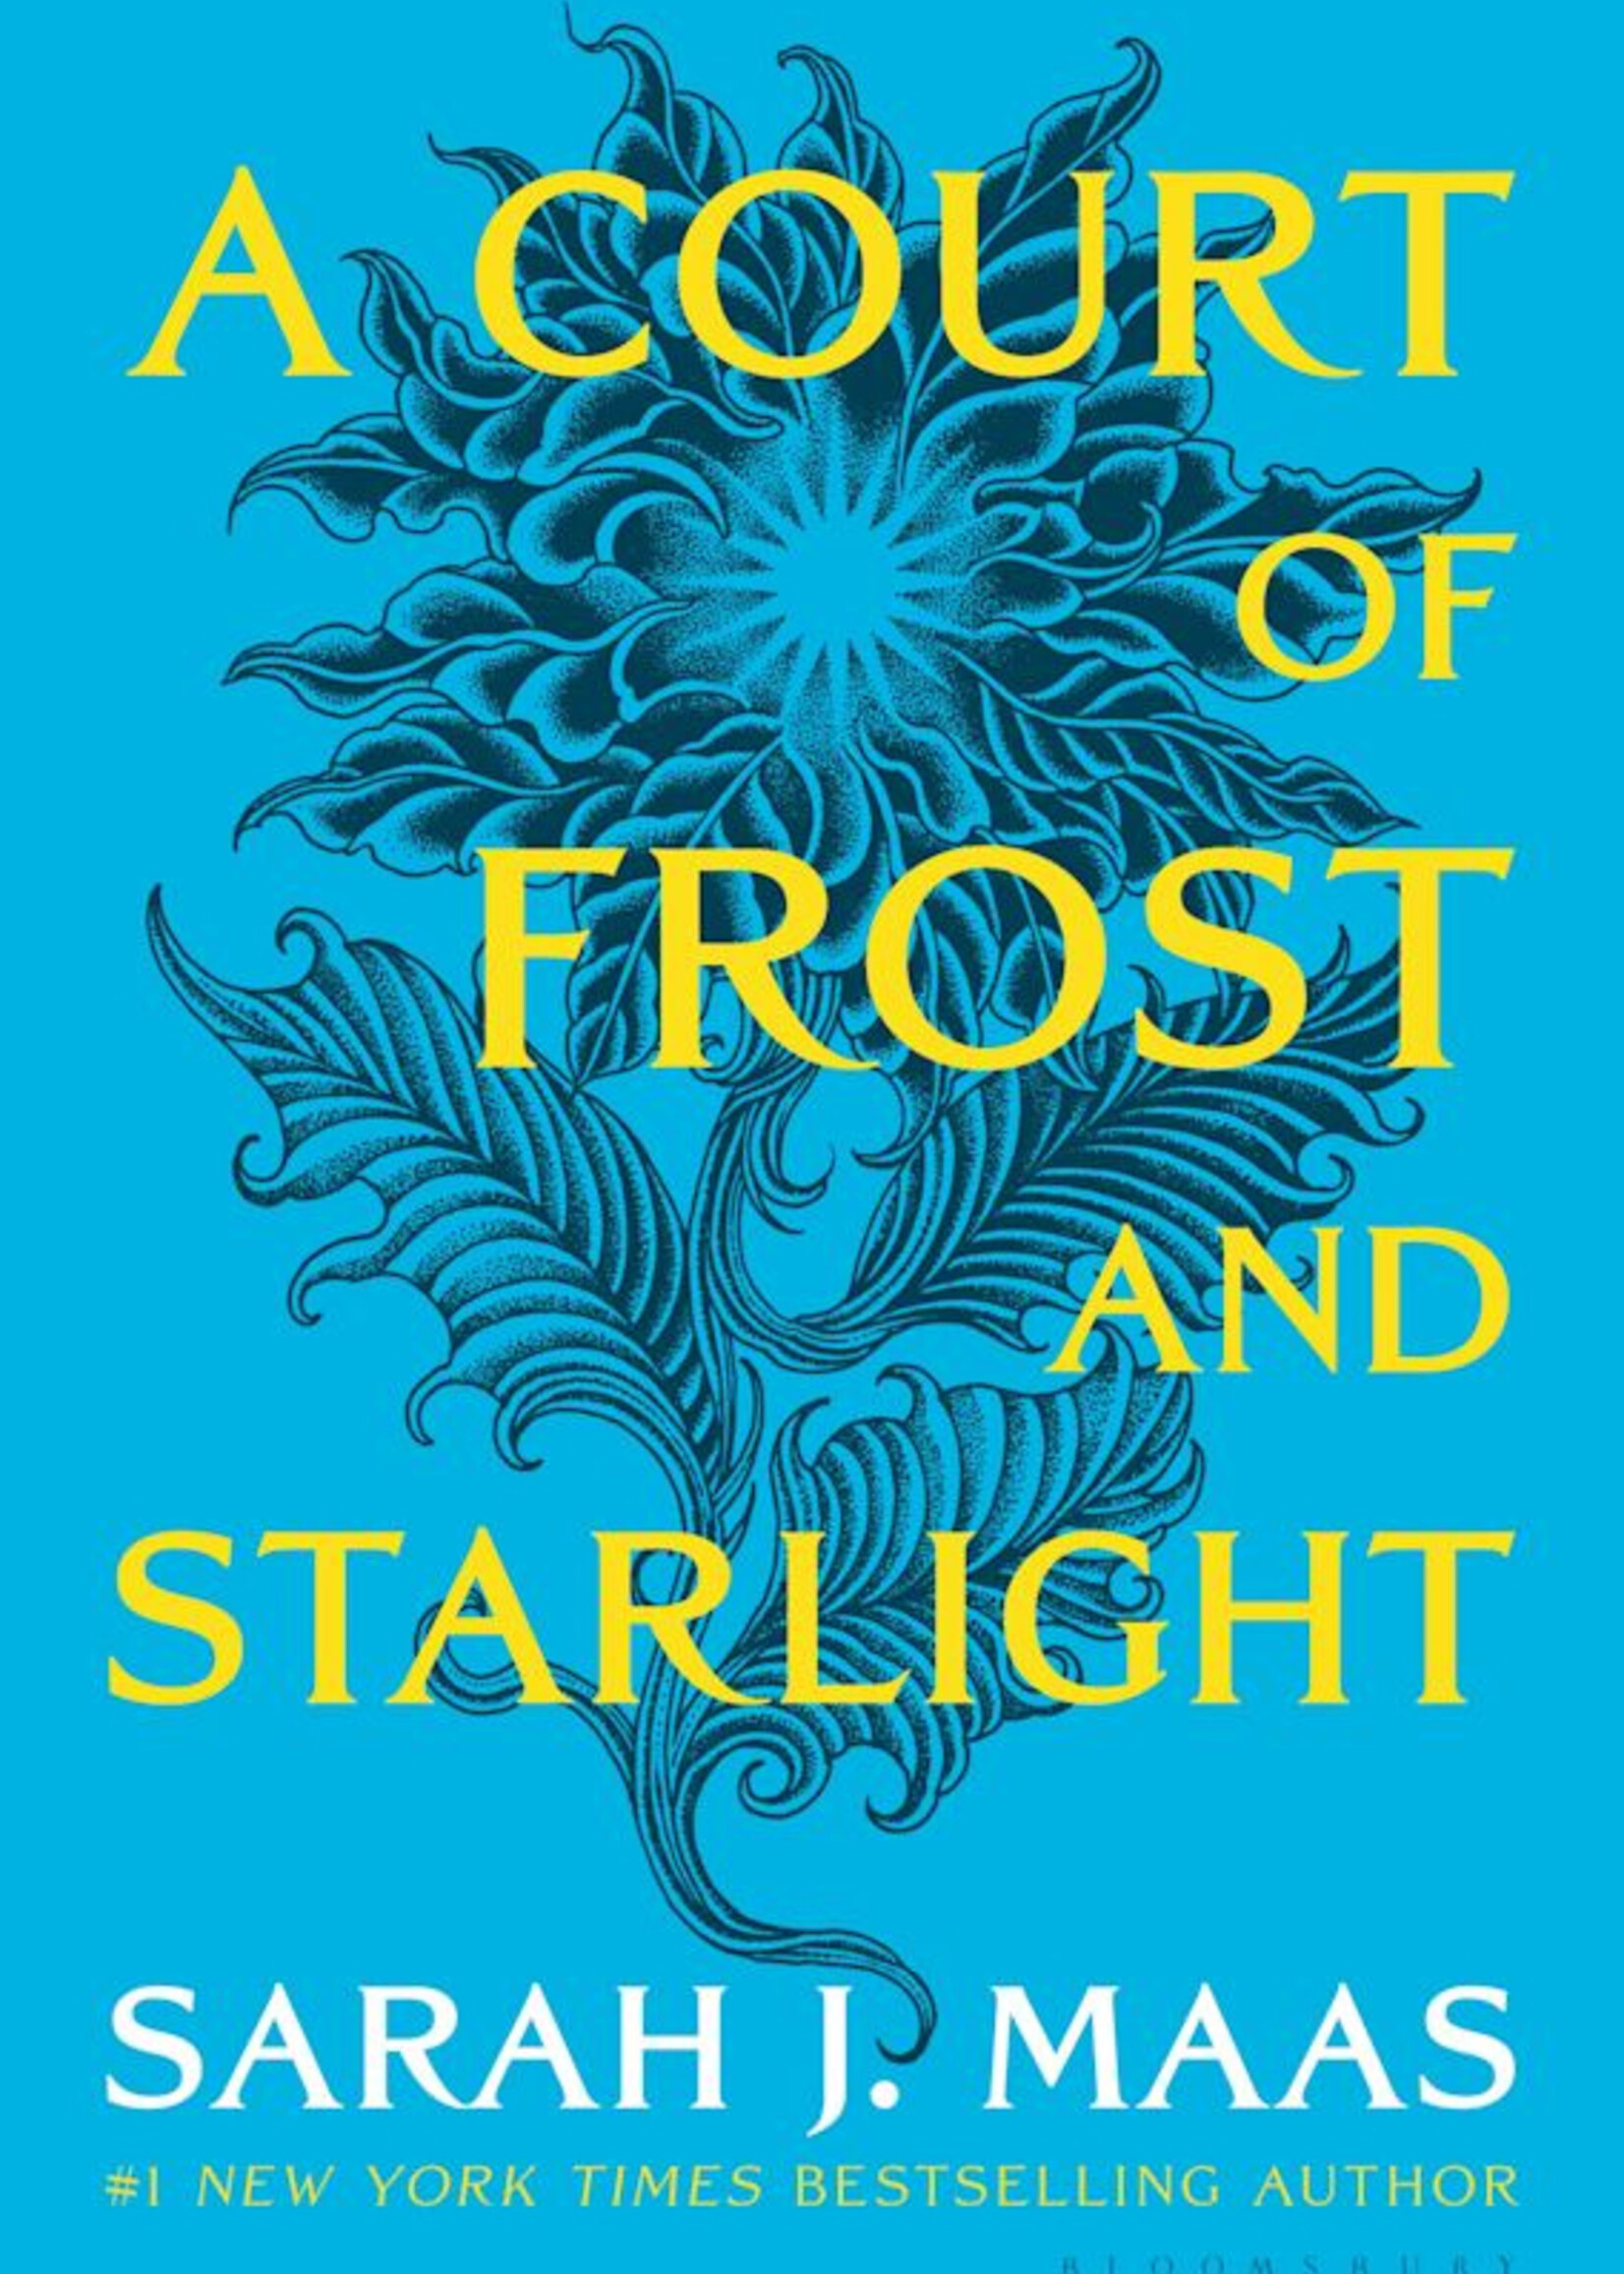 Bloomsbury A Court of Frost and Starlight (Book #3.5 in the A Court of Thorns and Roses Series)